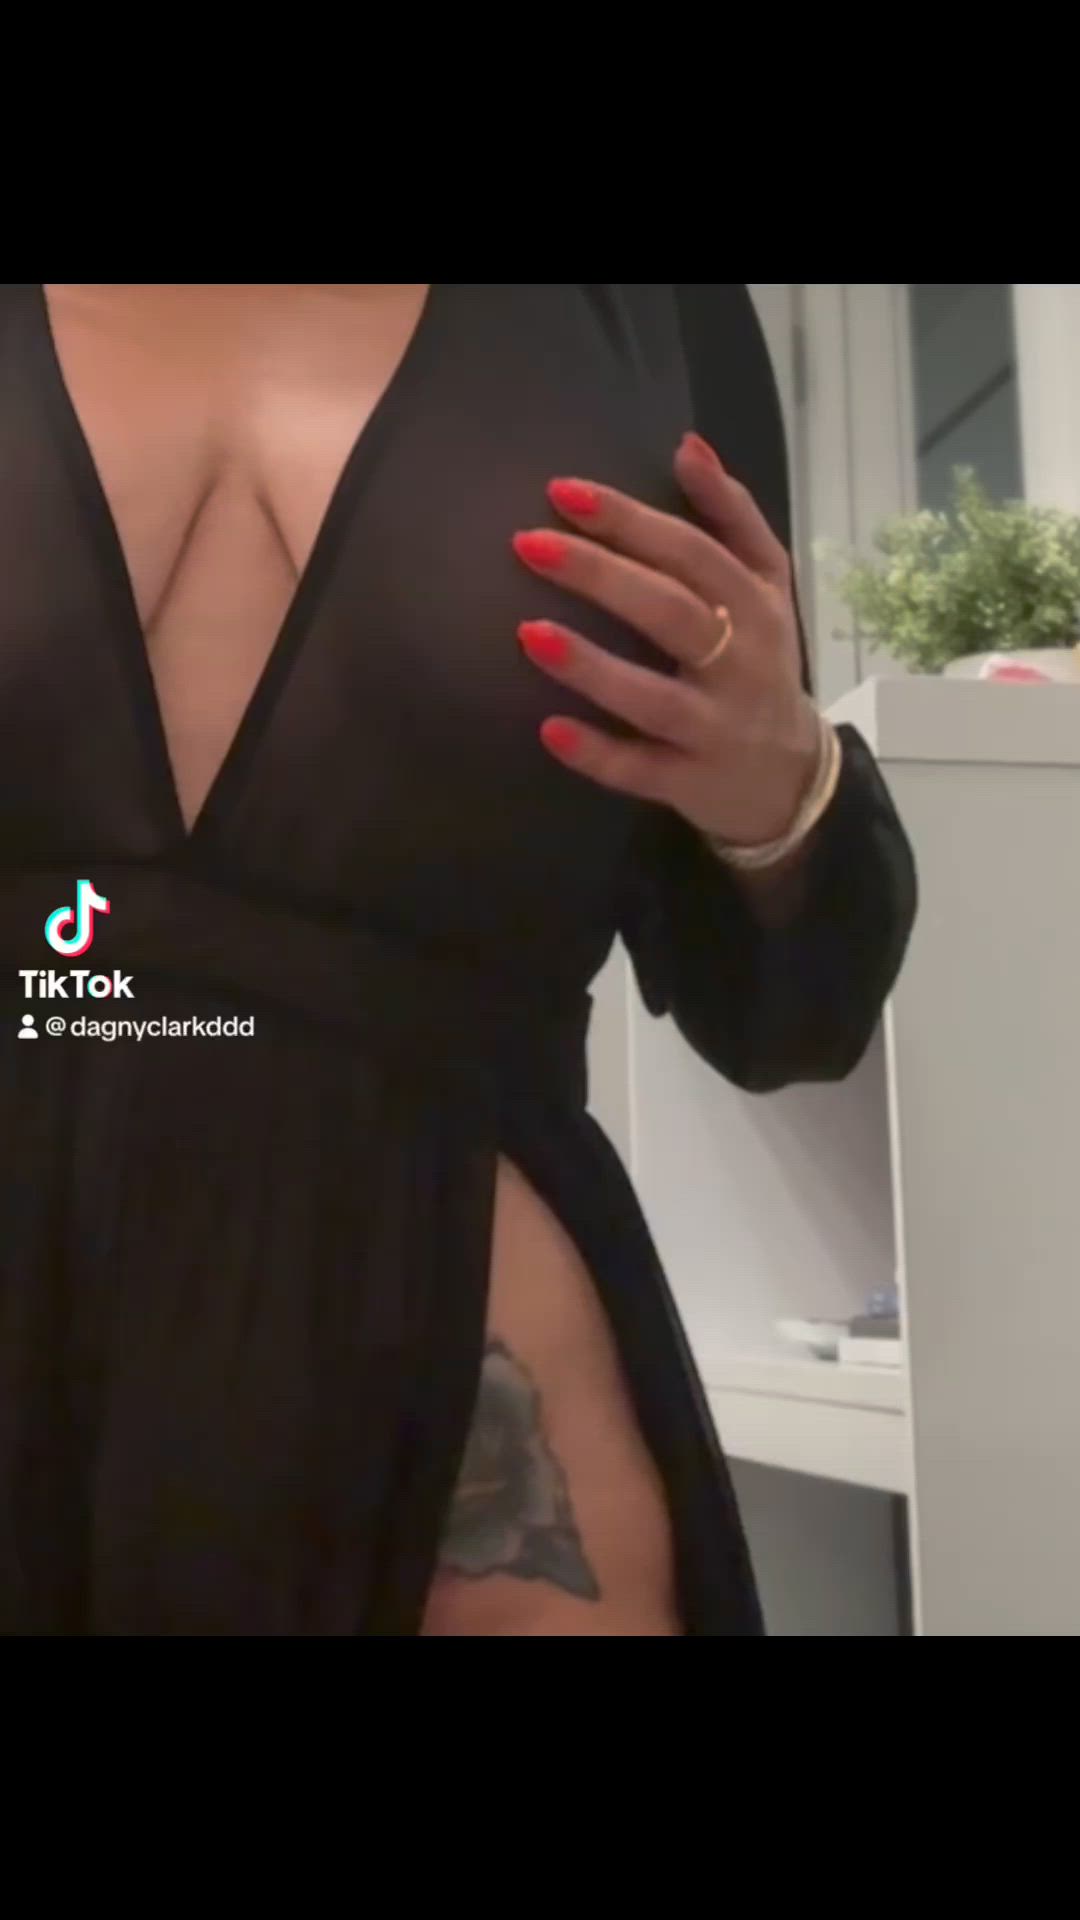 Big Tits porn video with onlyfans model dagnyclarkddd <strong>@dagnyclark</strong>